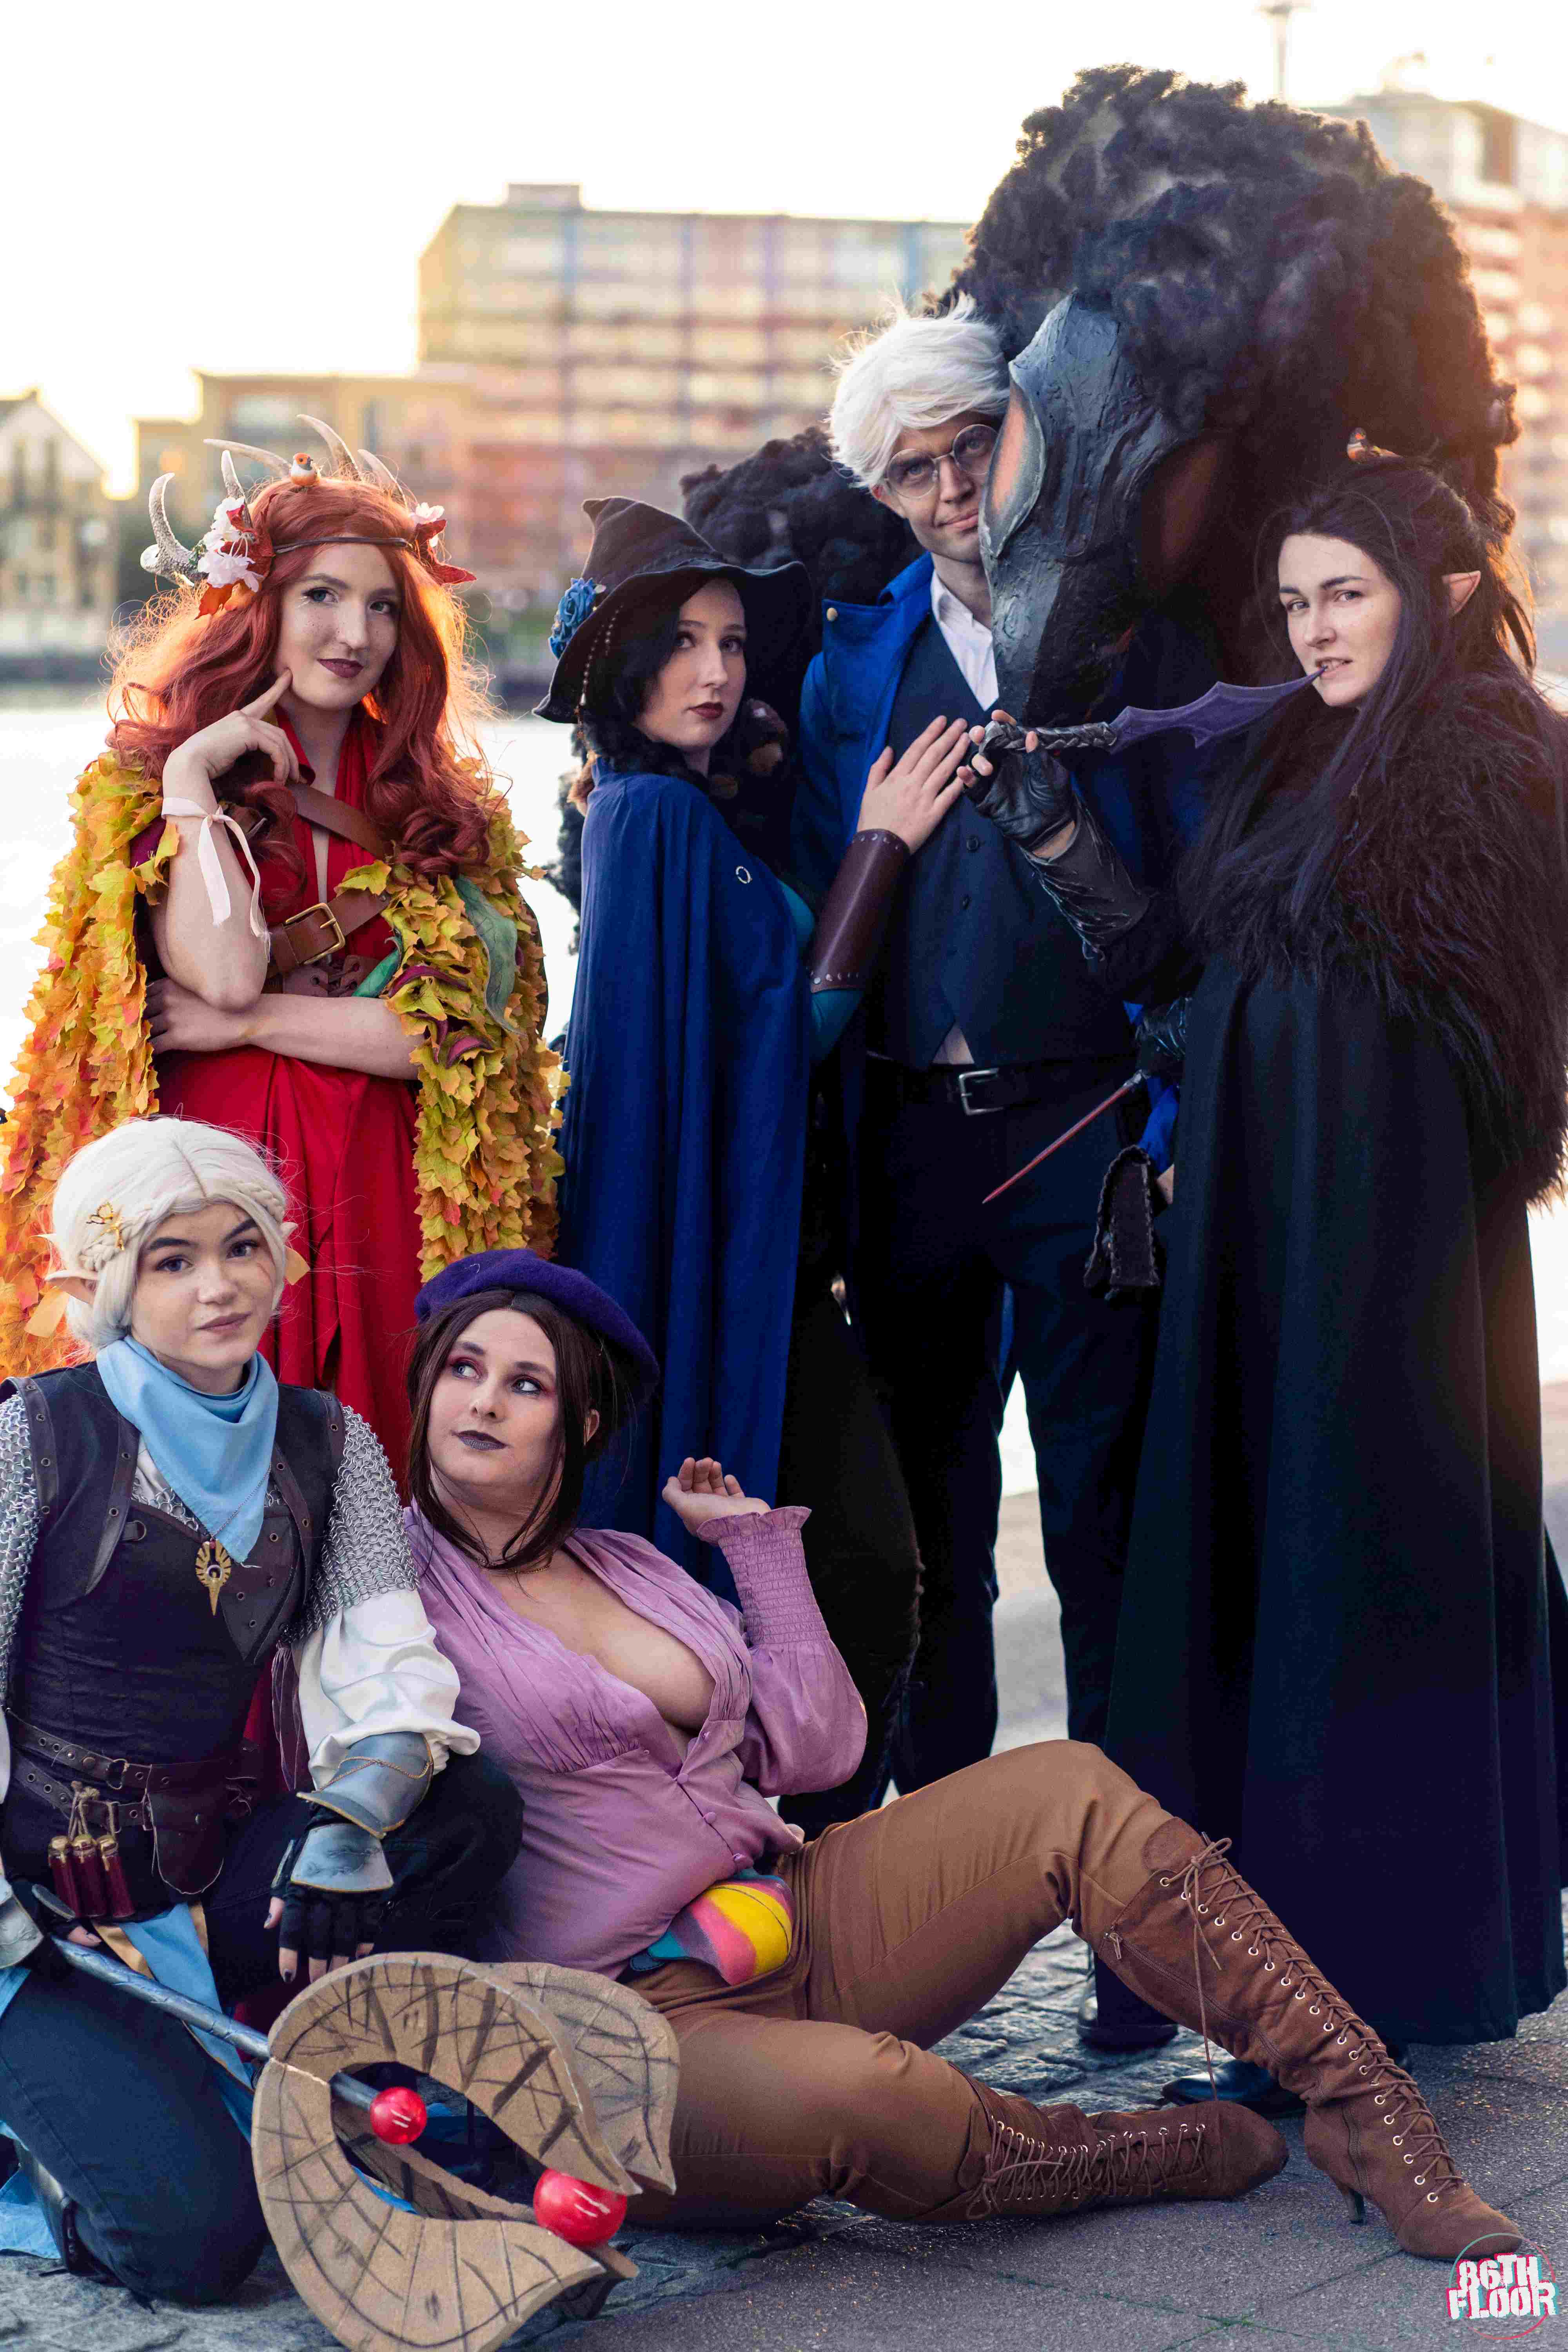 Vox Machina Critical Role cosplayers from MCM London Comic Con 2022